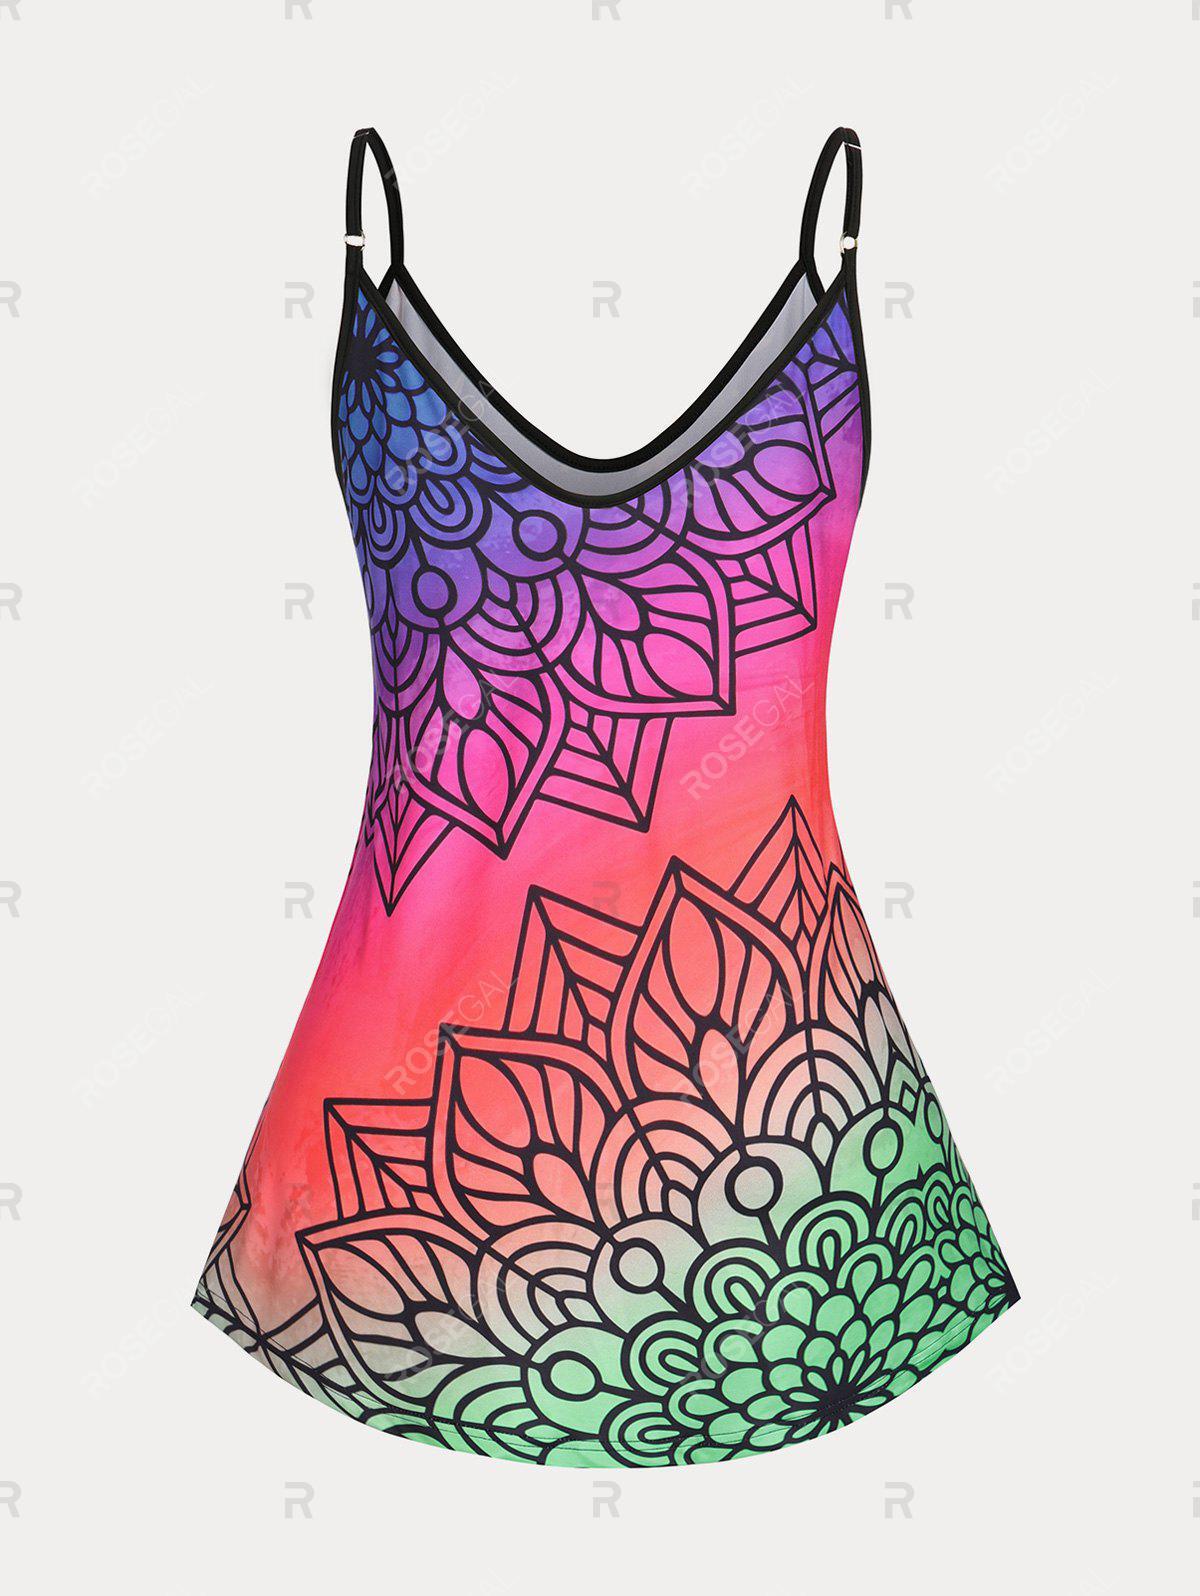 Bohemian Print Ombre Cami Top and Curve 3D Leggings Plus Size Summer Outfit